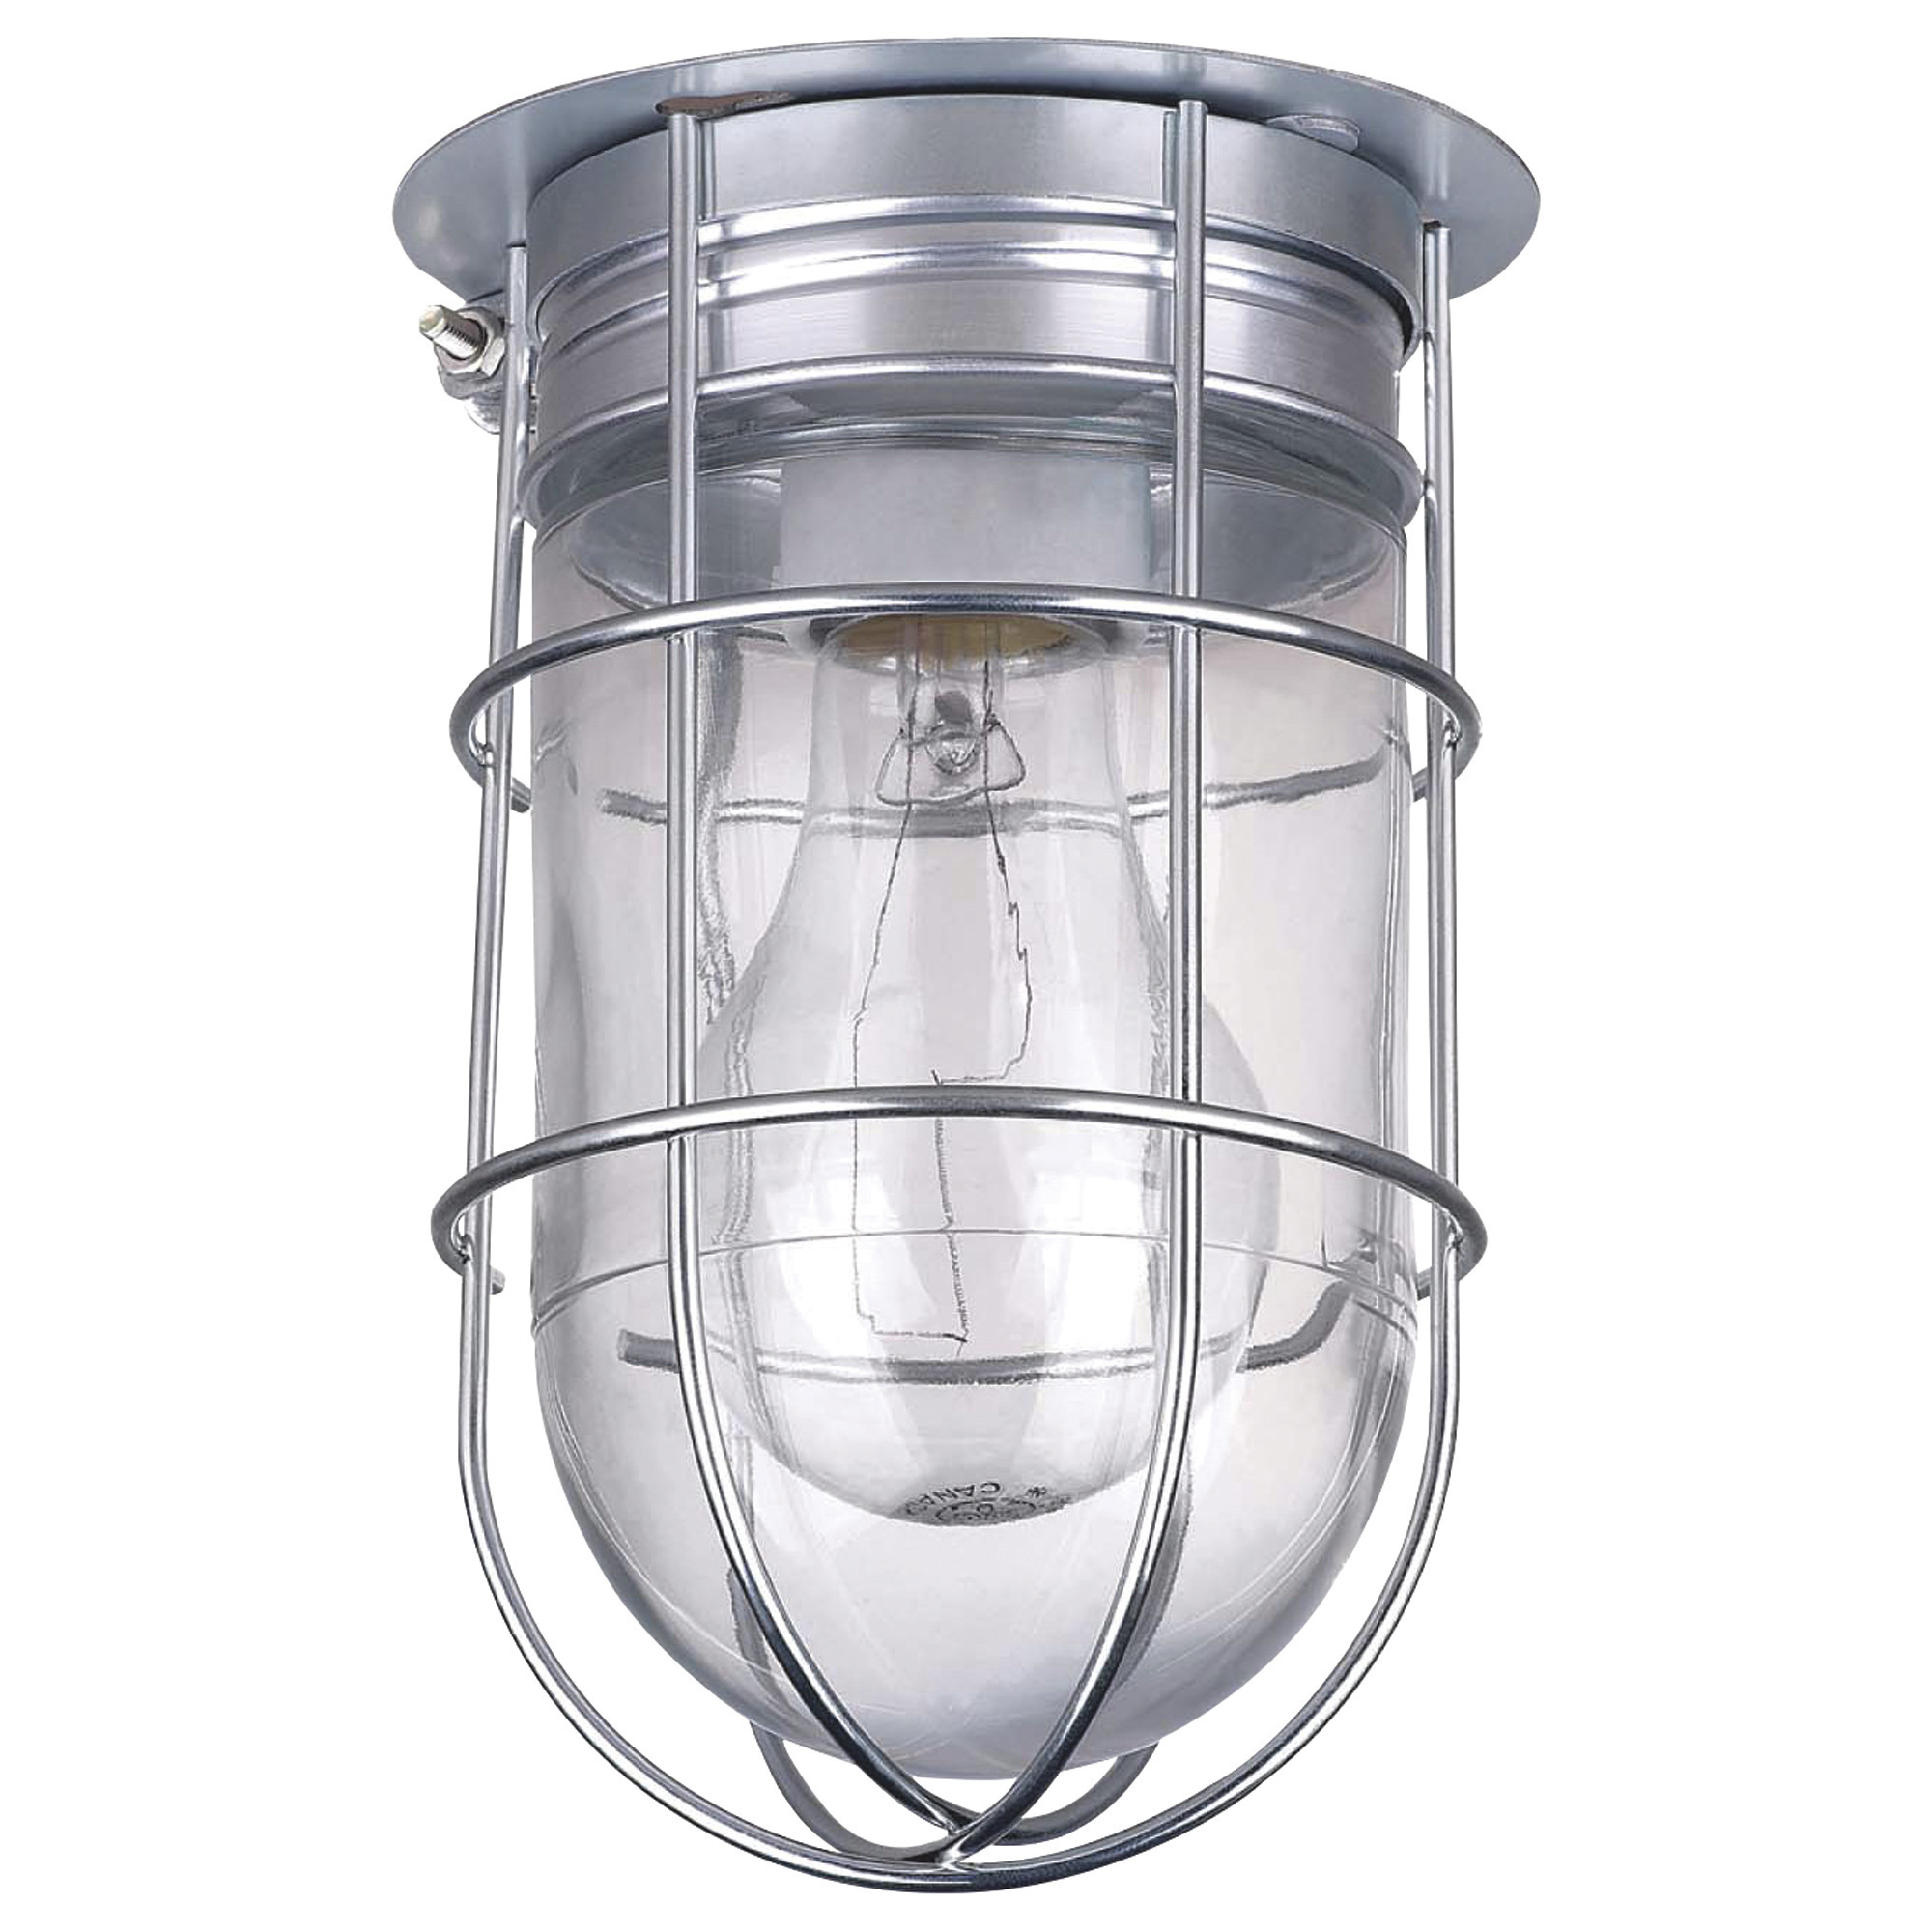 Canarm Ceiling/Wall Outdoor/Indoor Barn Light with Cage, 4.5Inch Diameter, 100 Watts, Model BL04CWG